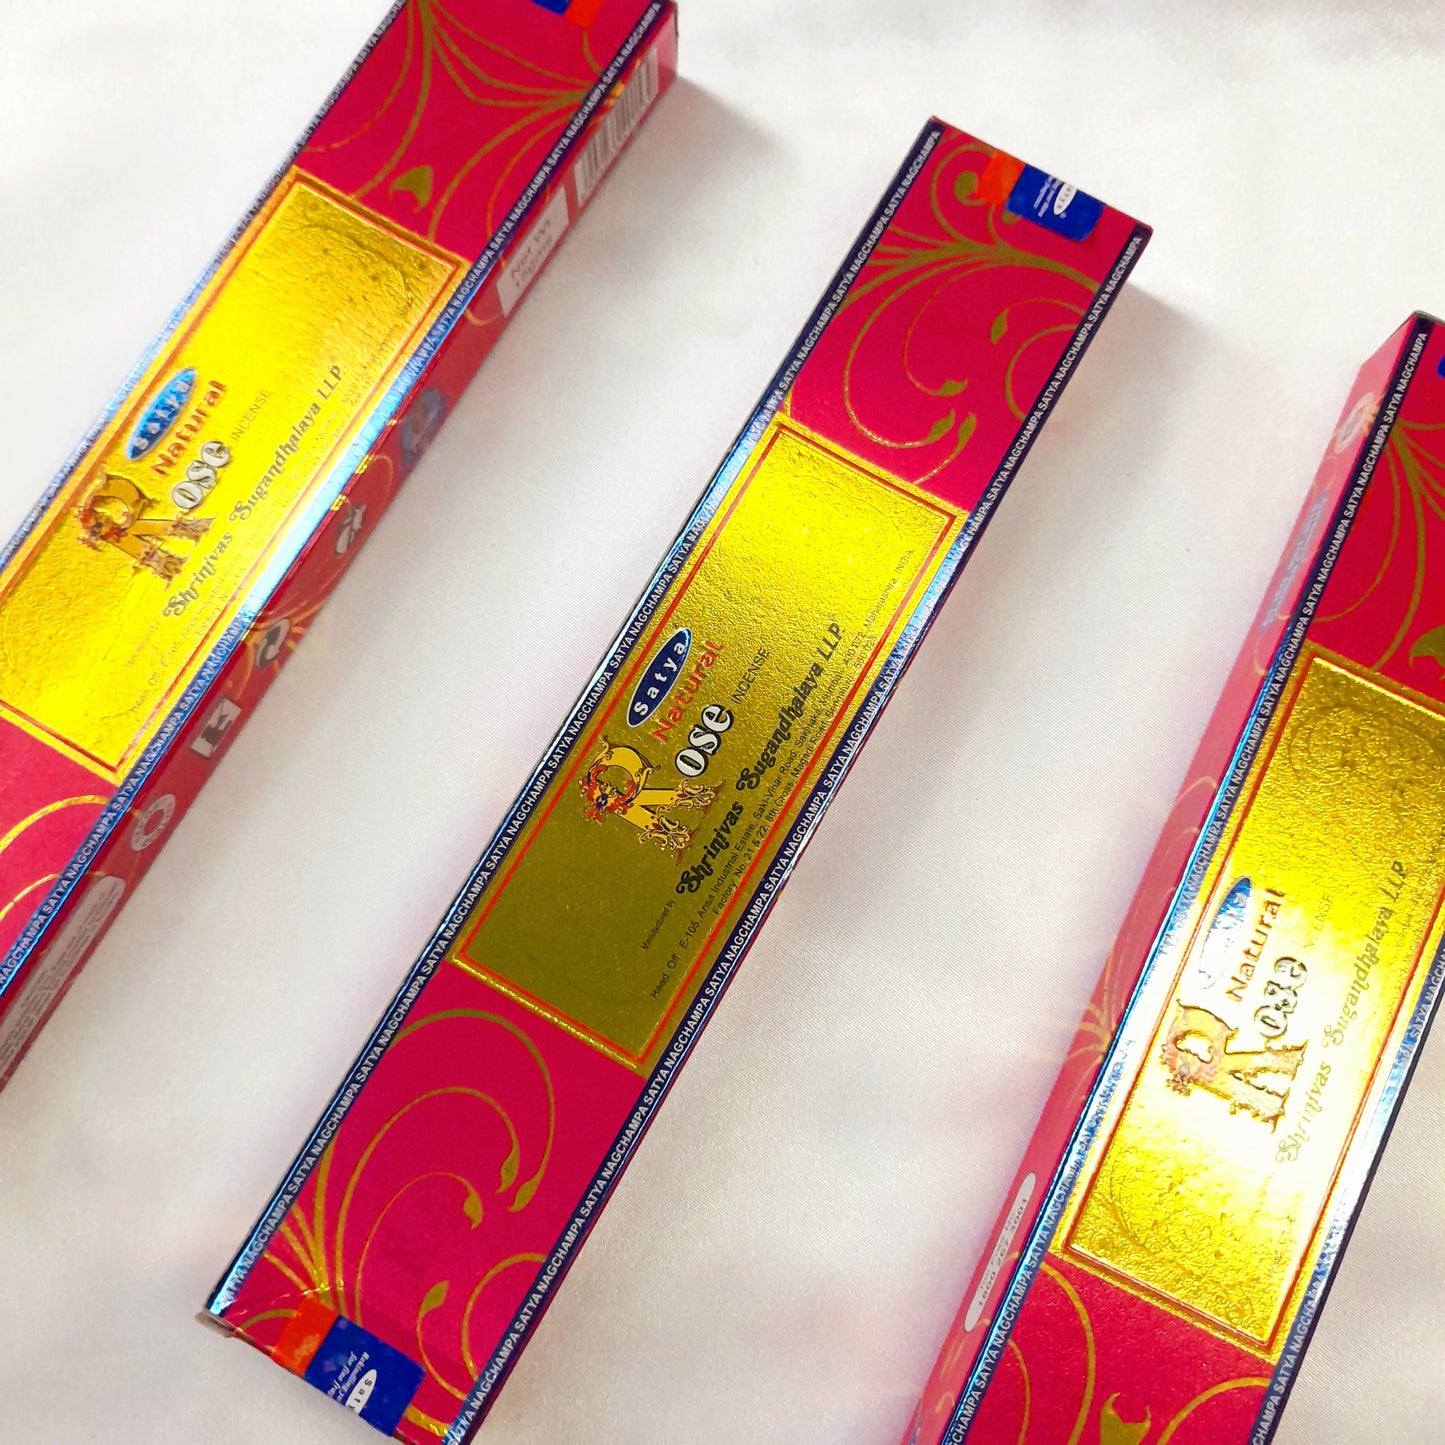 Satya incense sticks for a delightful aromatic experience. Handcrafted with exotic scents, perfect for relaxation and meditation.